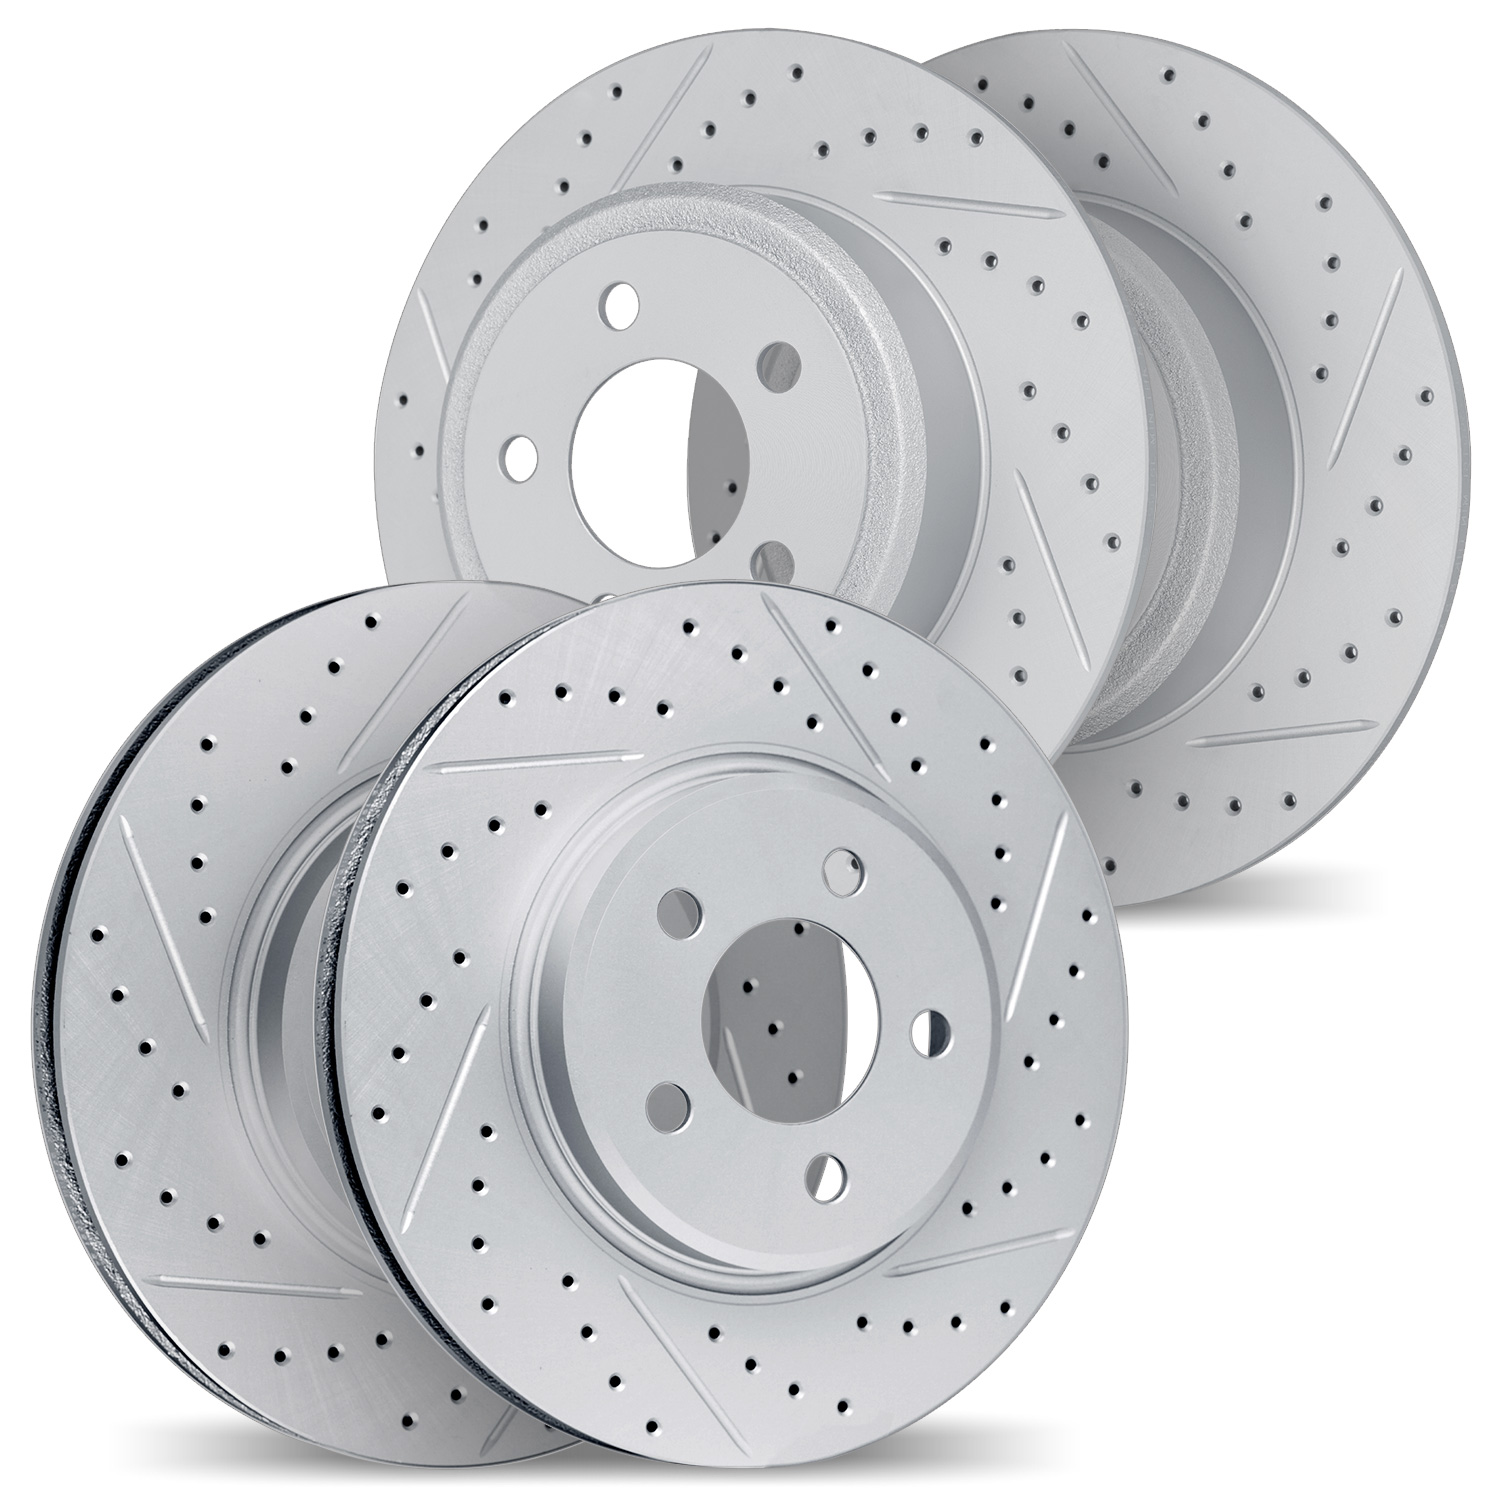 2004-80015 Geoperformance Drilled/Slotted Brake Rotors, 2006-2007 Ford/Lincoln/Mercury/Mazda, Position: Front and Rear